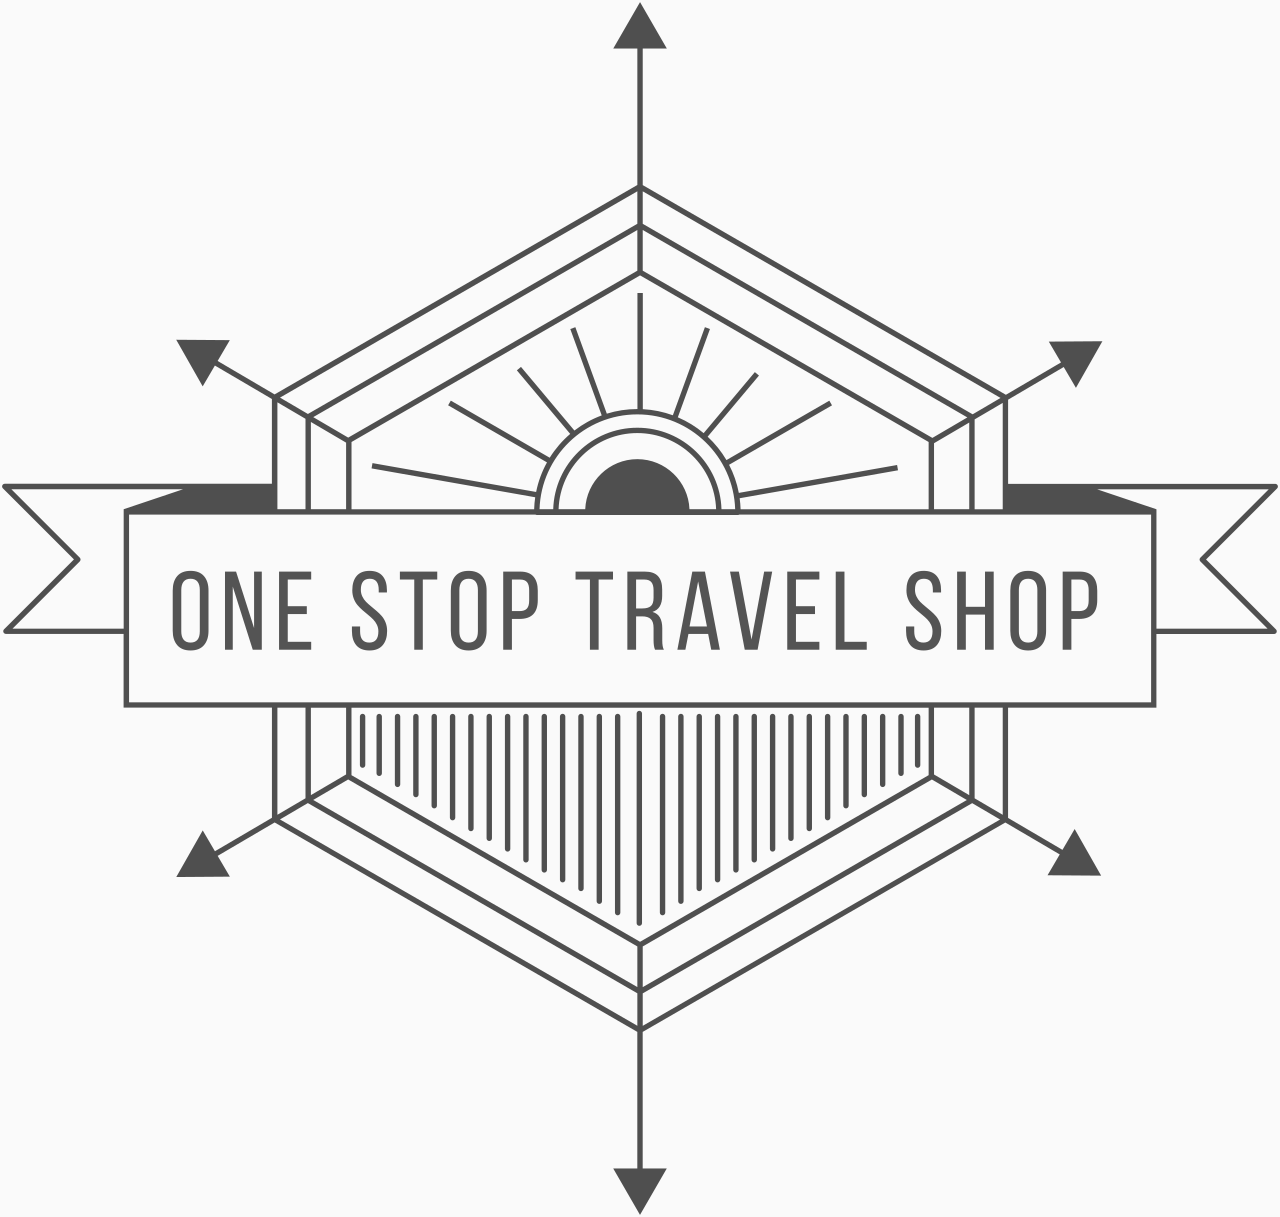 One Stop Travel Shop's logo